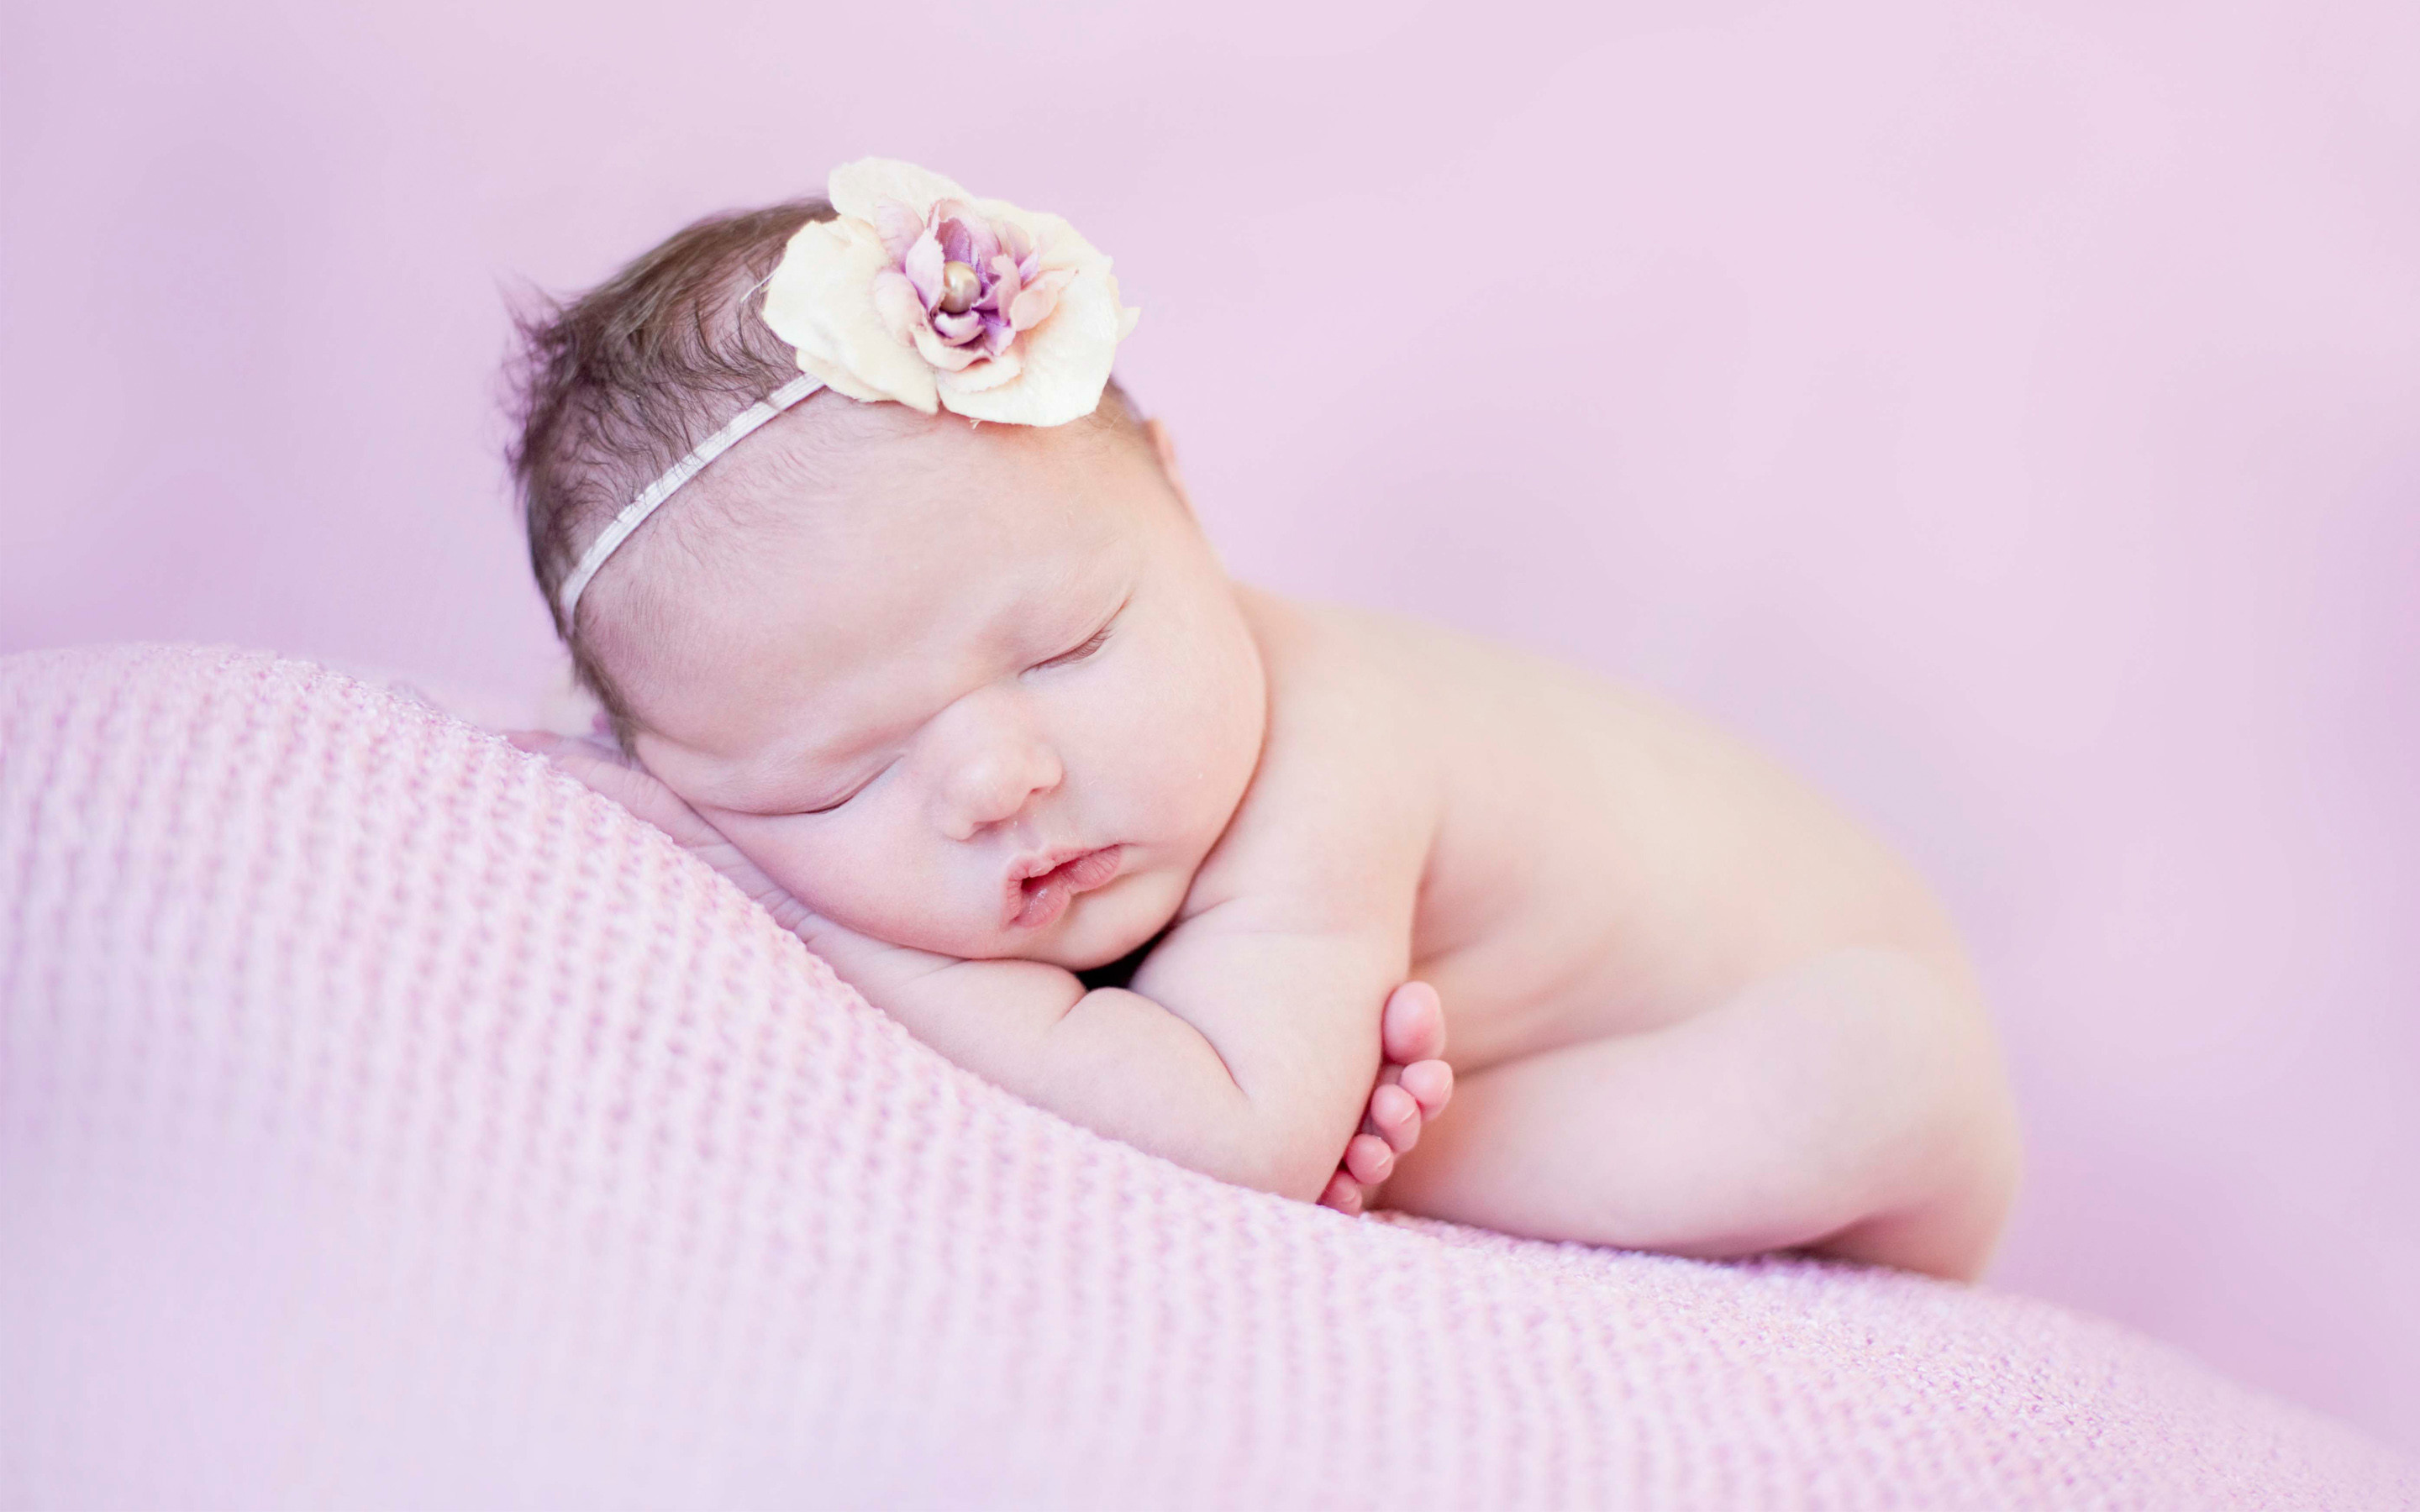 2880x1800 HD Cute Baby Wallpapers,Cute Baby Pictures,Cute Babies Pics,Cute Kids  Wallpapers,Cute Baby Girls Wallpapers in HD High Quality Resolutions - Page  2